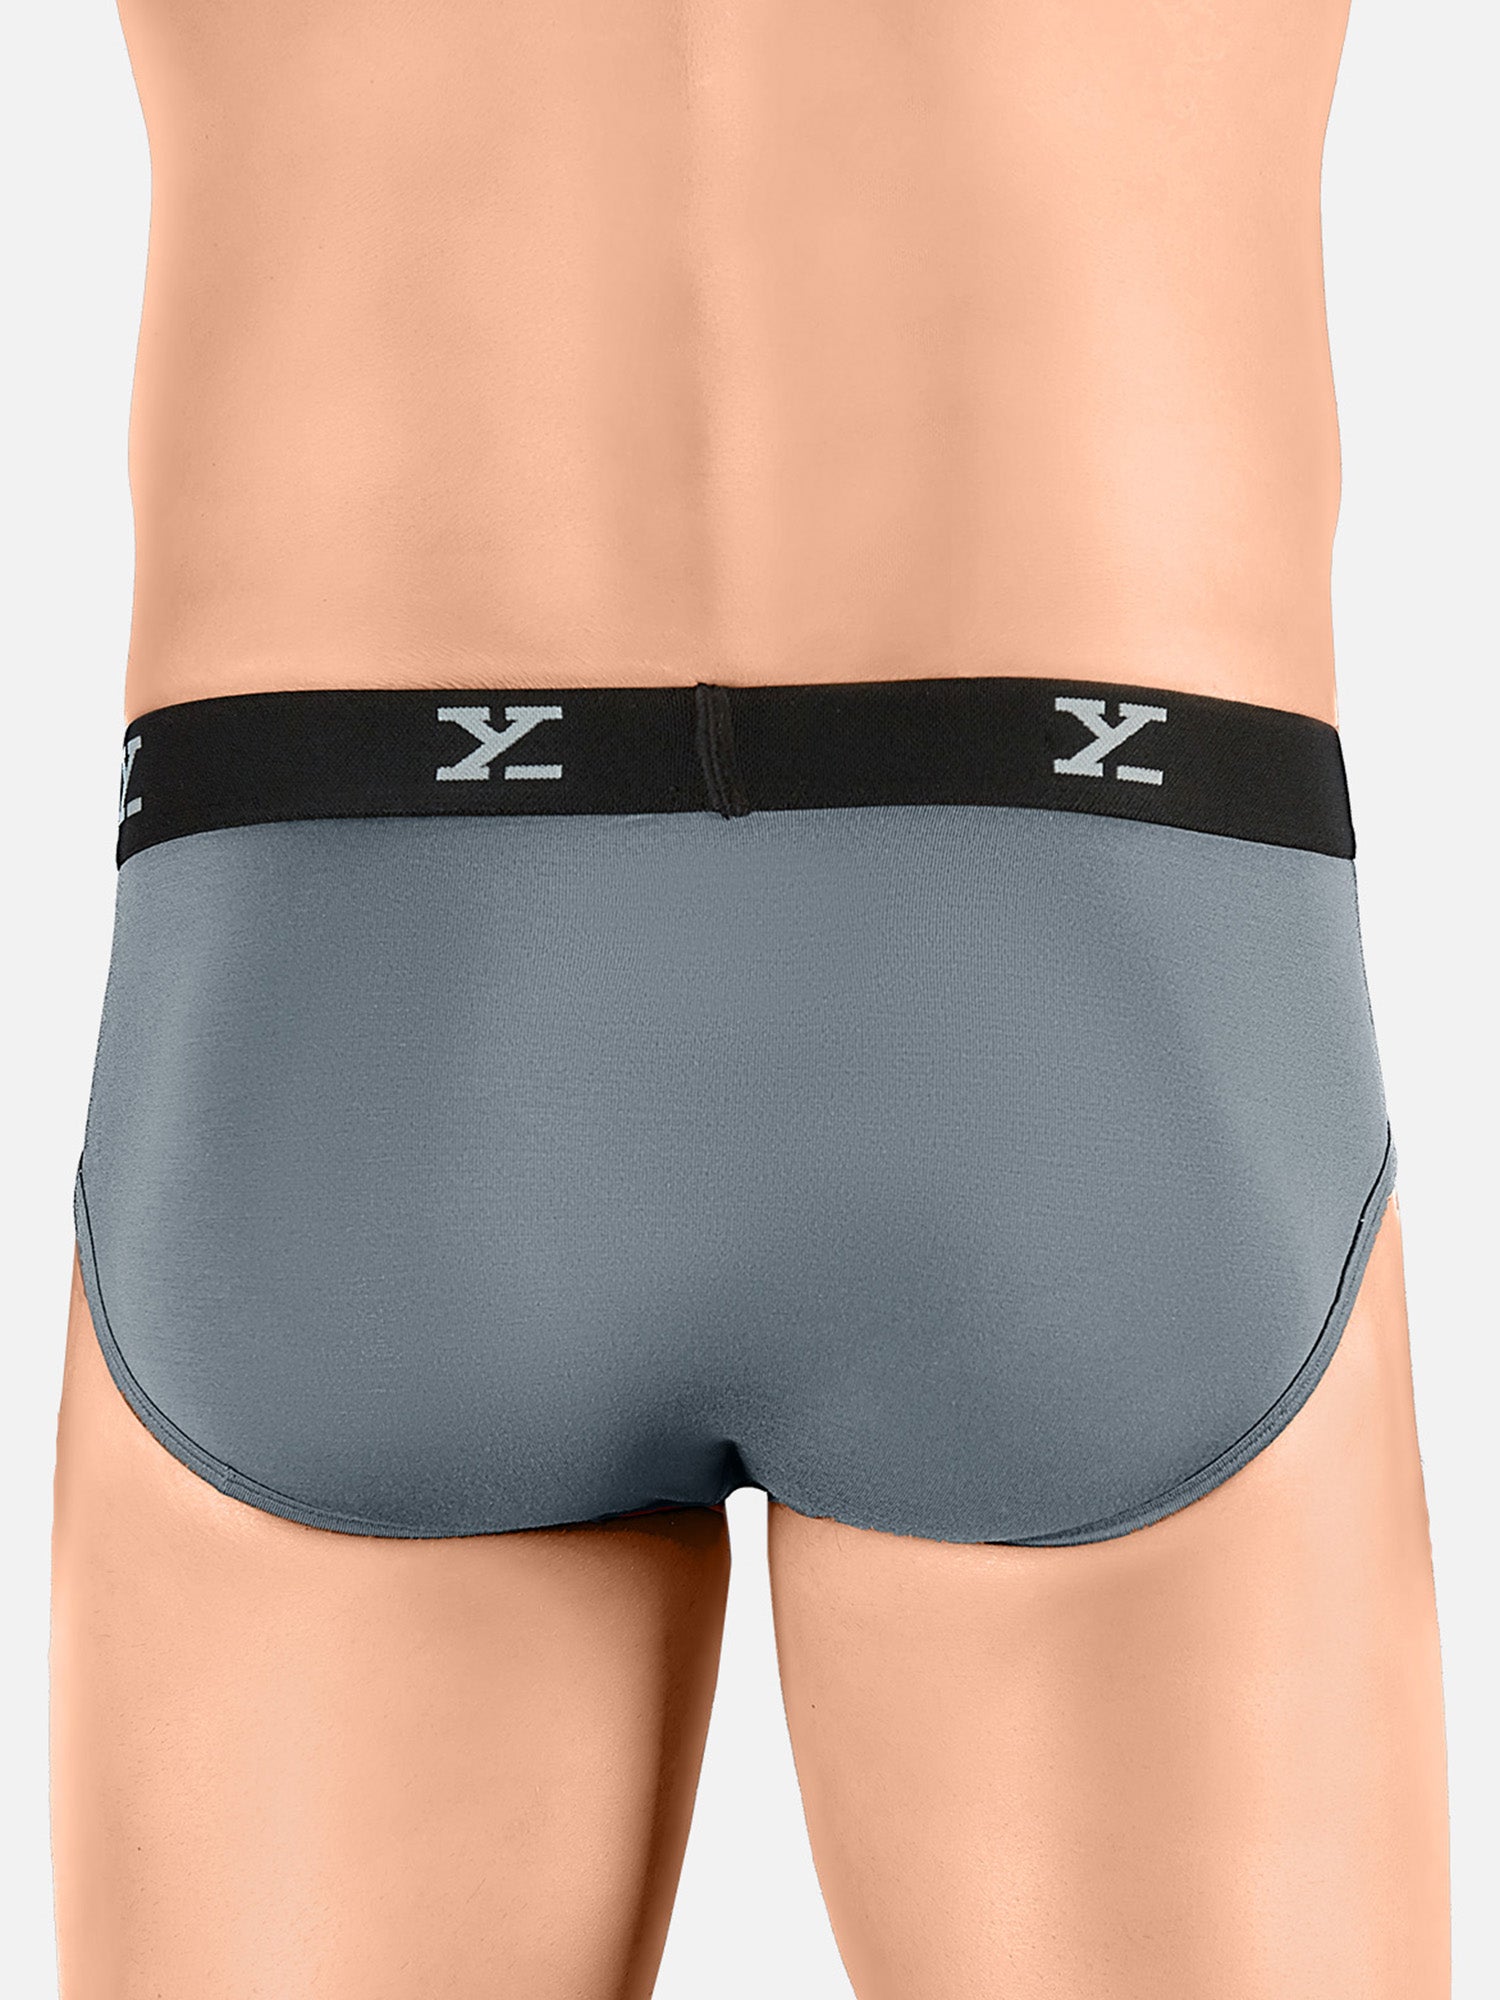 Ace Tencel™ Modal Briefs For Men Pack of 2 -  XYXX Mens Apparels